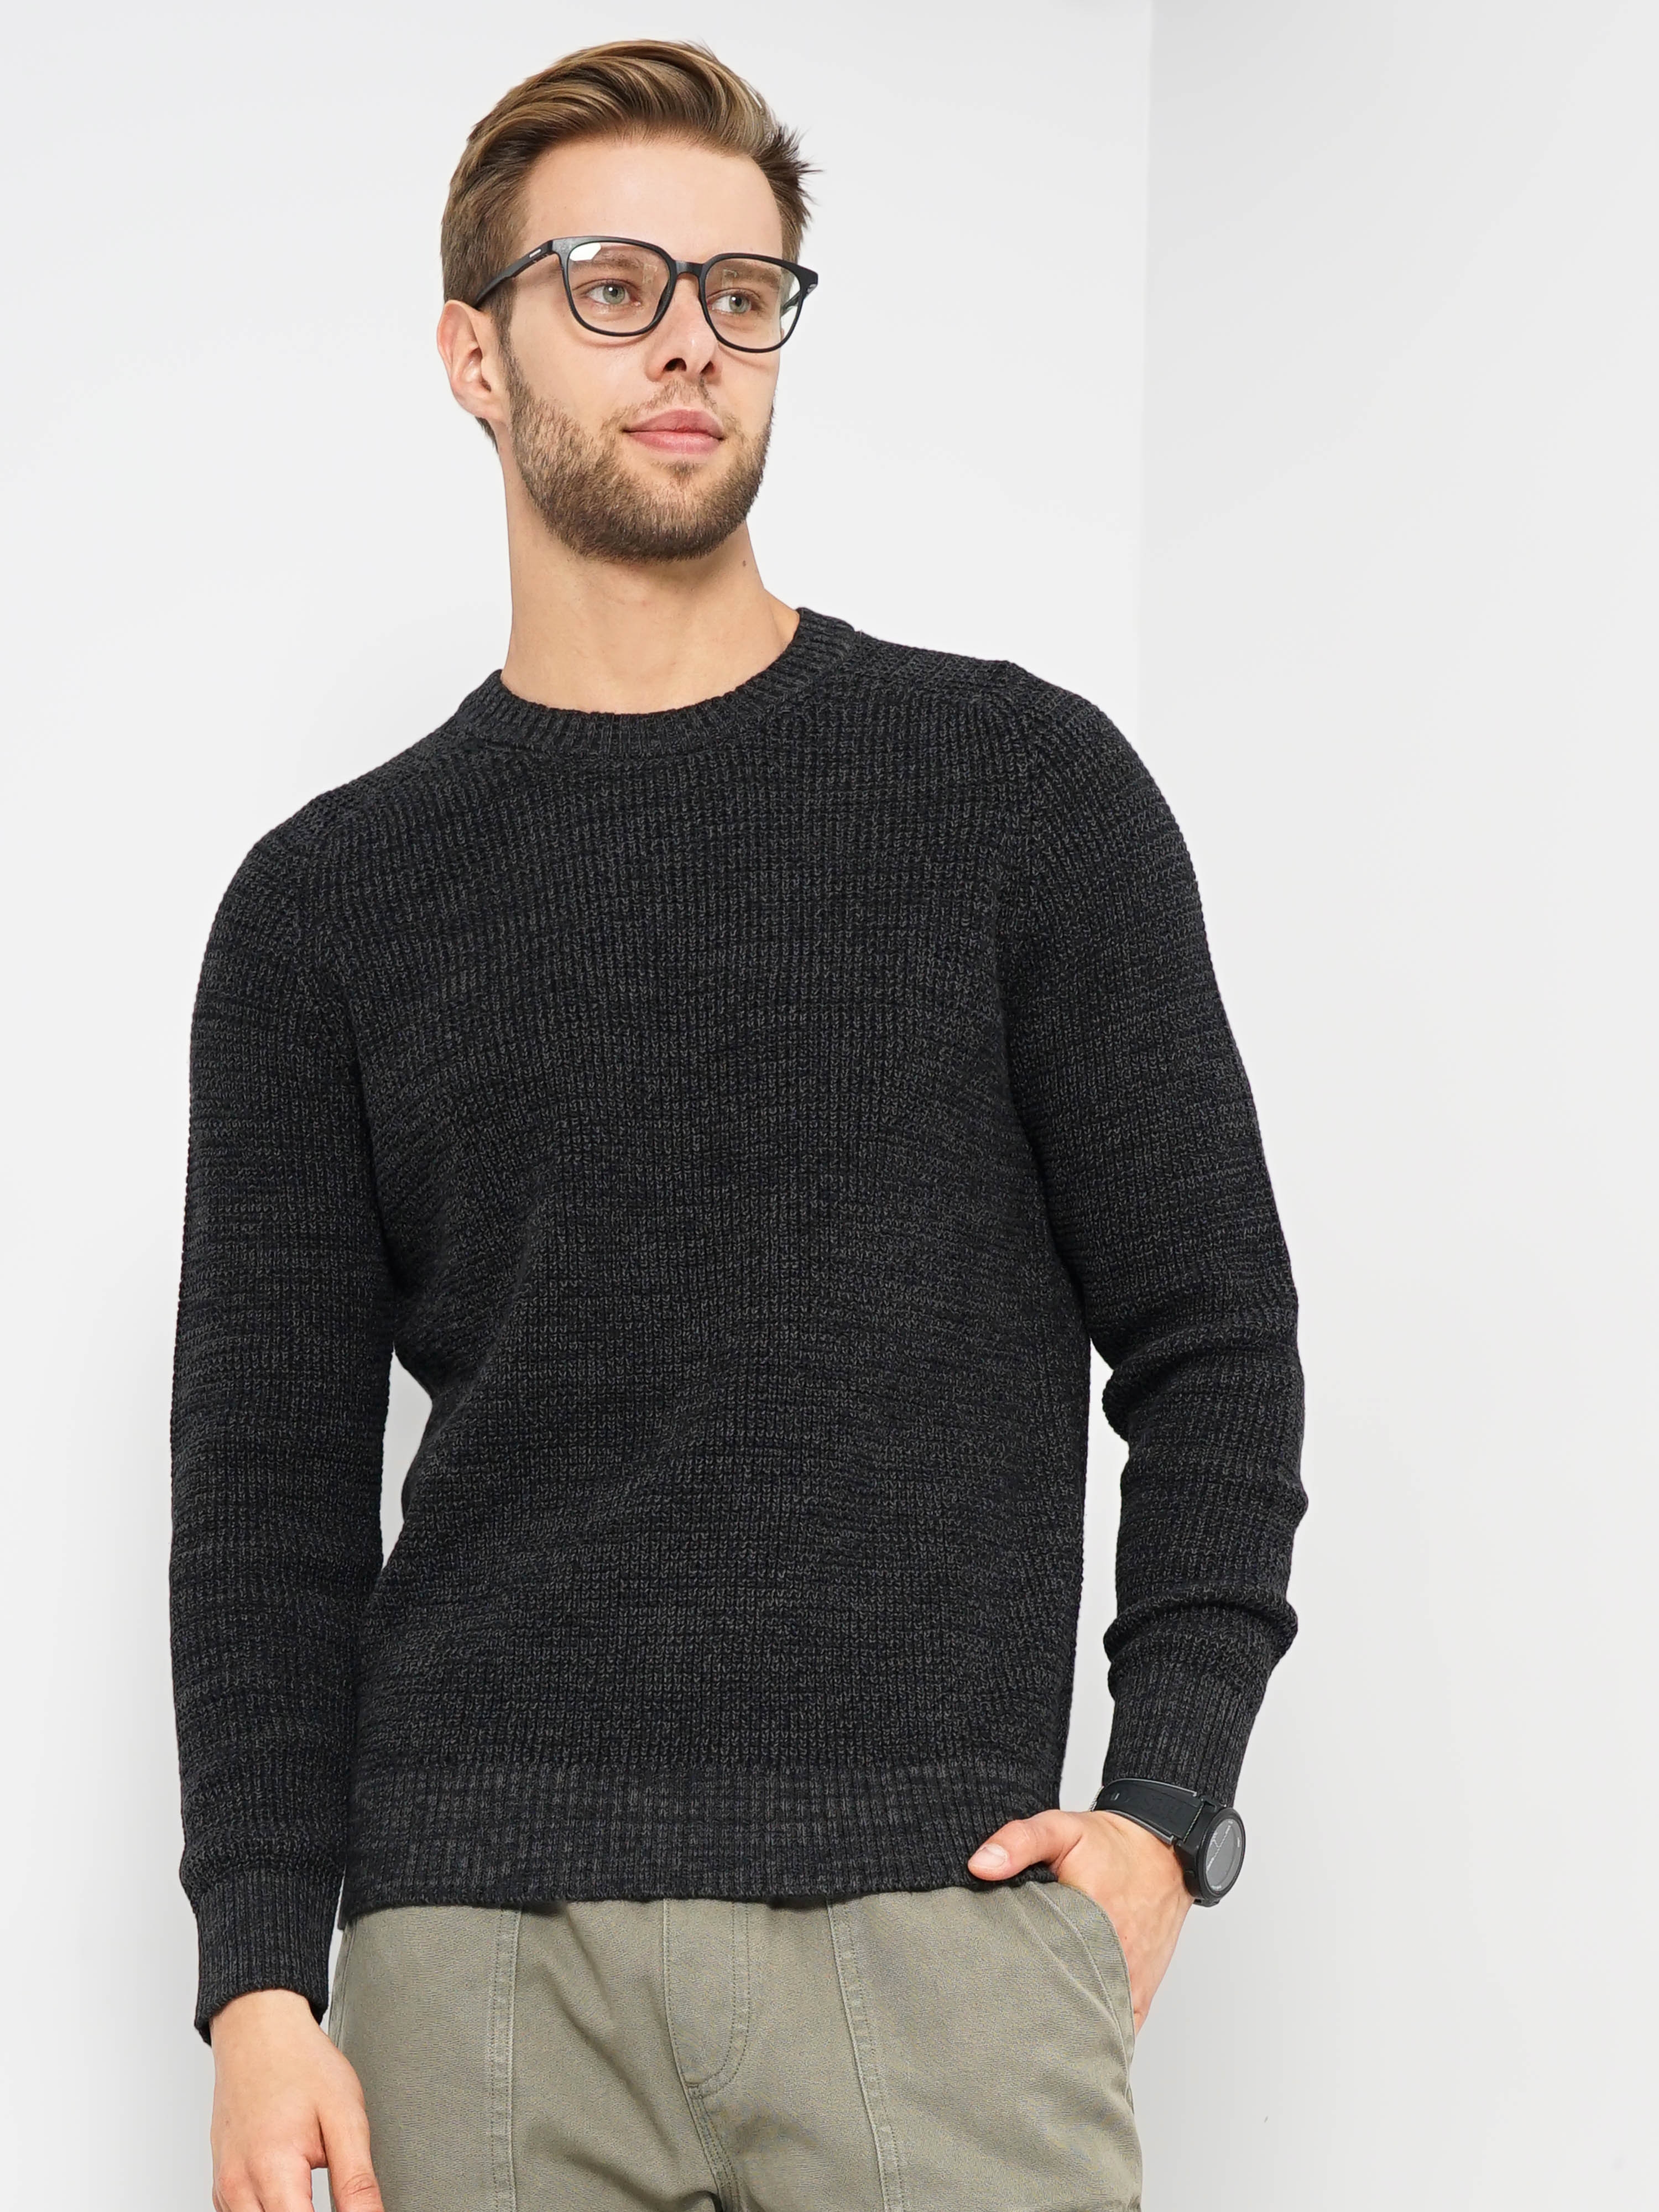 Men's Black Knitted Sweaters